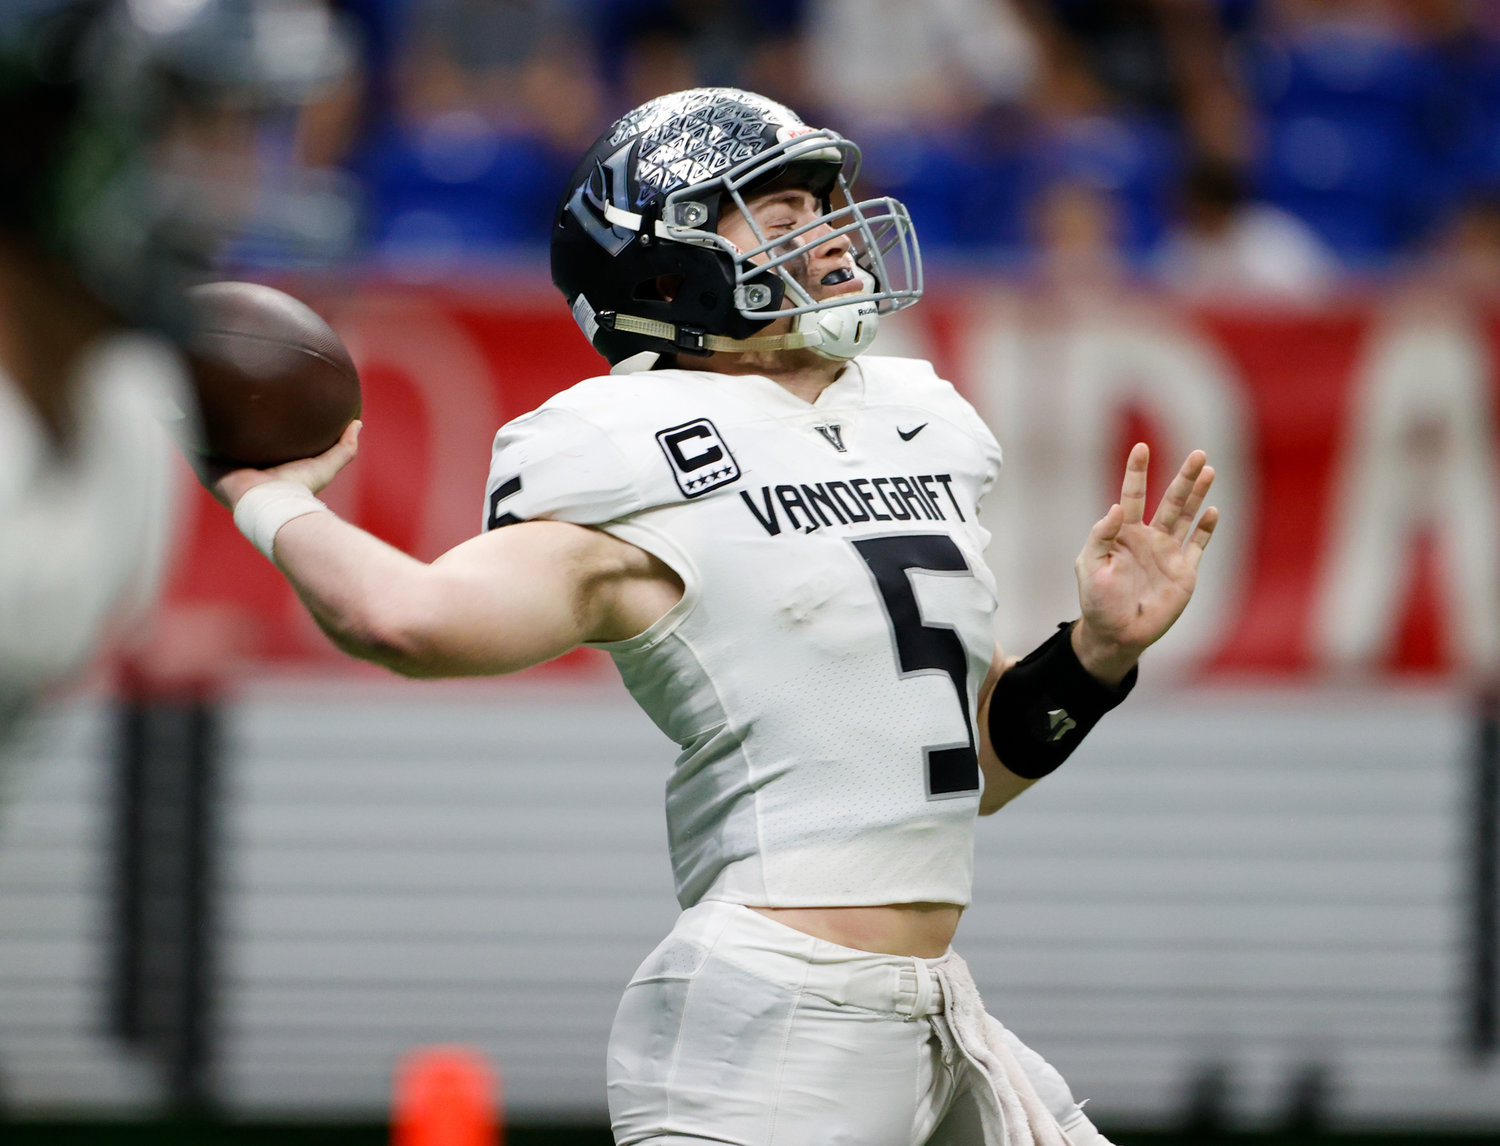 Vandegrift Vipers senior quarterback Brayden Buchanan (5) passes the ball deep downfield during the Class 6A-DII state semifinal football game between Katy and Vandegrift on Dec. 10, 2022 in San Antonio.